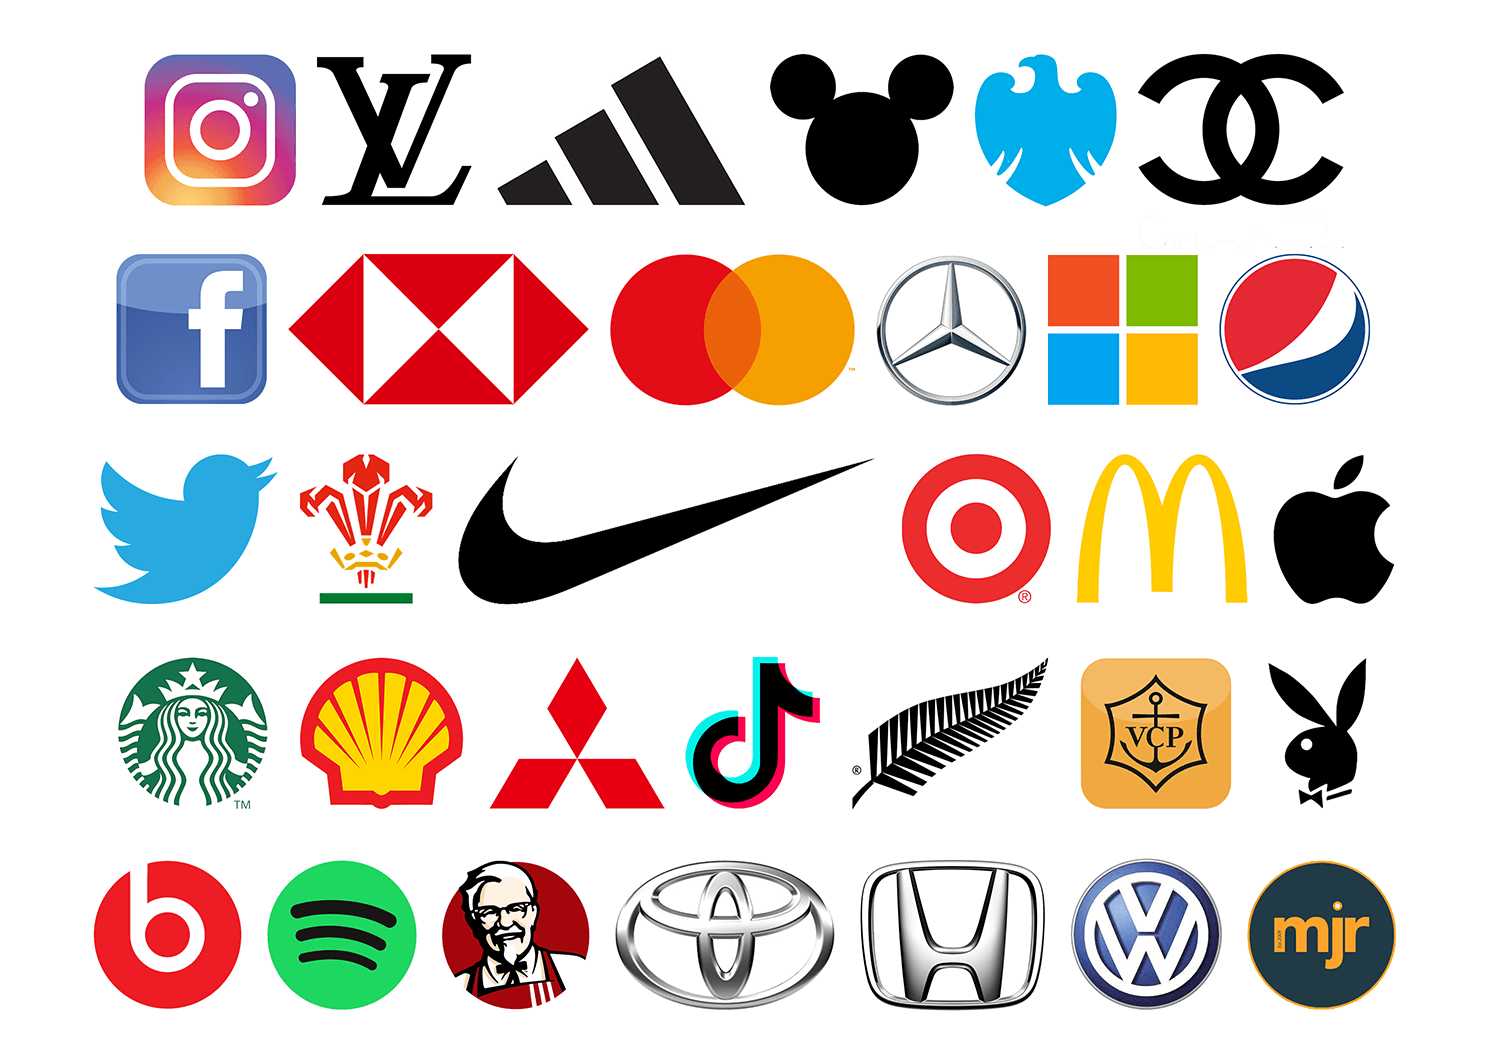 Ranking The 50 Most Iconic Logos 1 Selling Logo Software For Over 15 ...